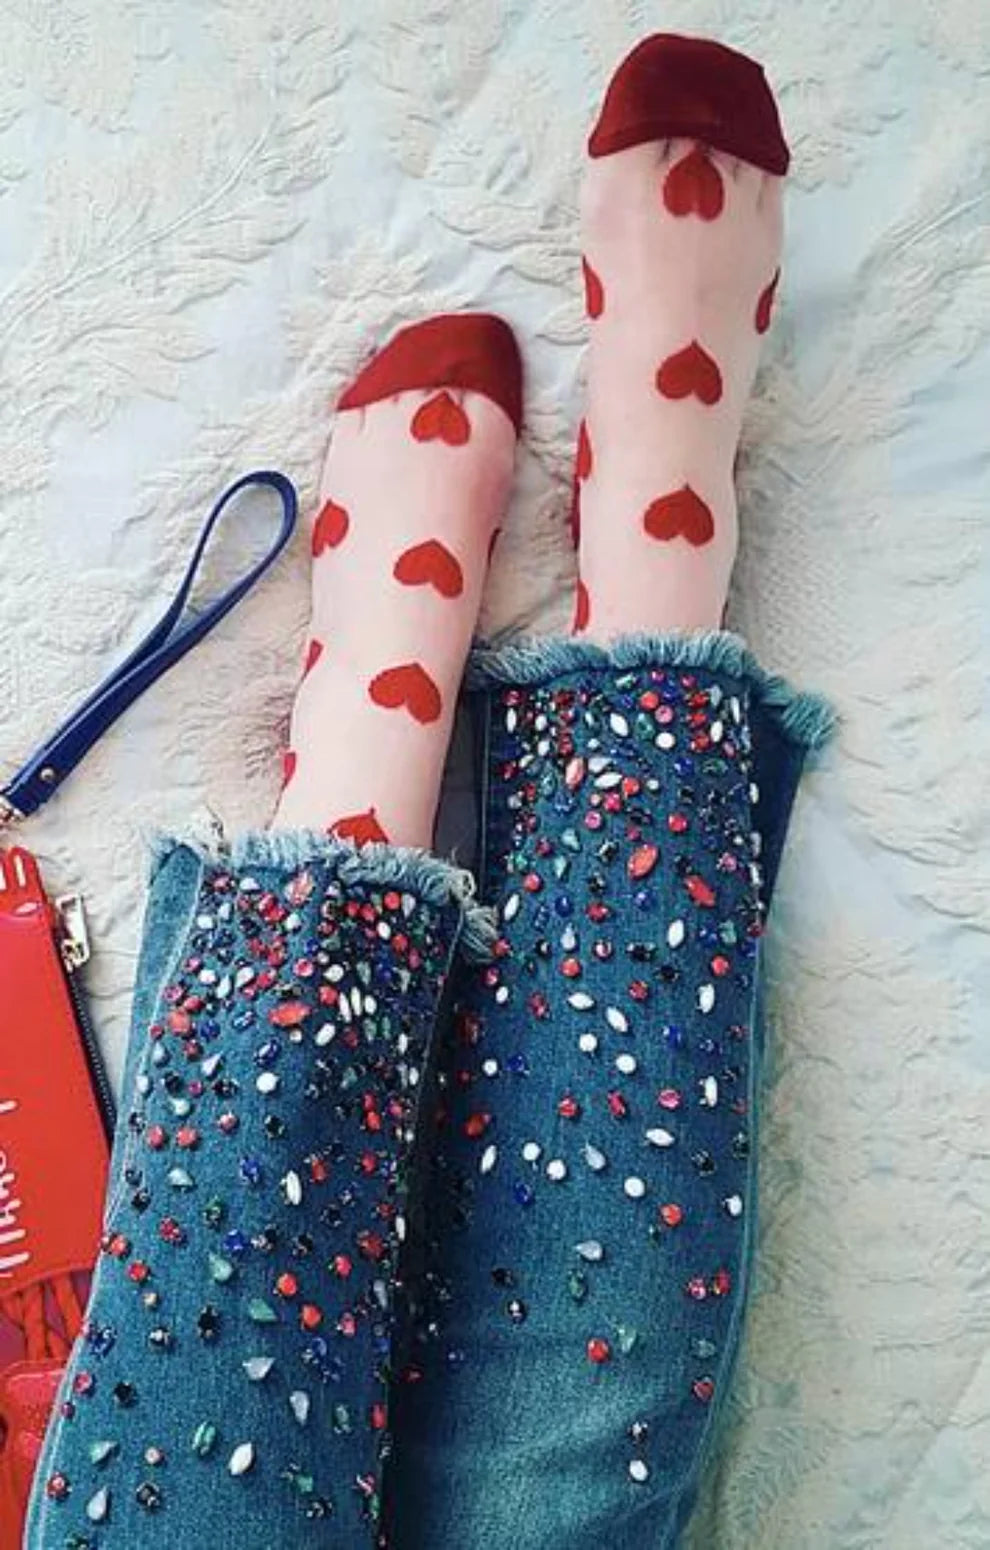 Leg of a woman wearing jeans with a red color of a product called Black Heart Sheer Socks of the TABBISOCKS brand, a transparent transparent fabric with a red heart pattern all over it